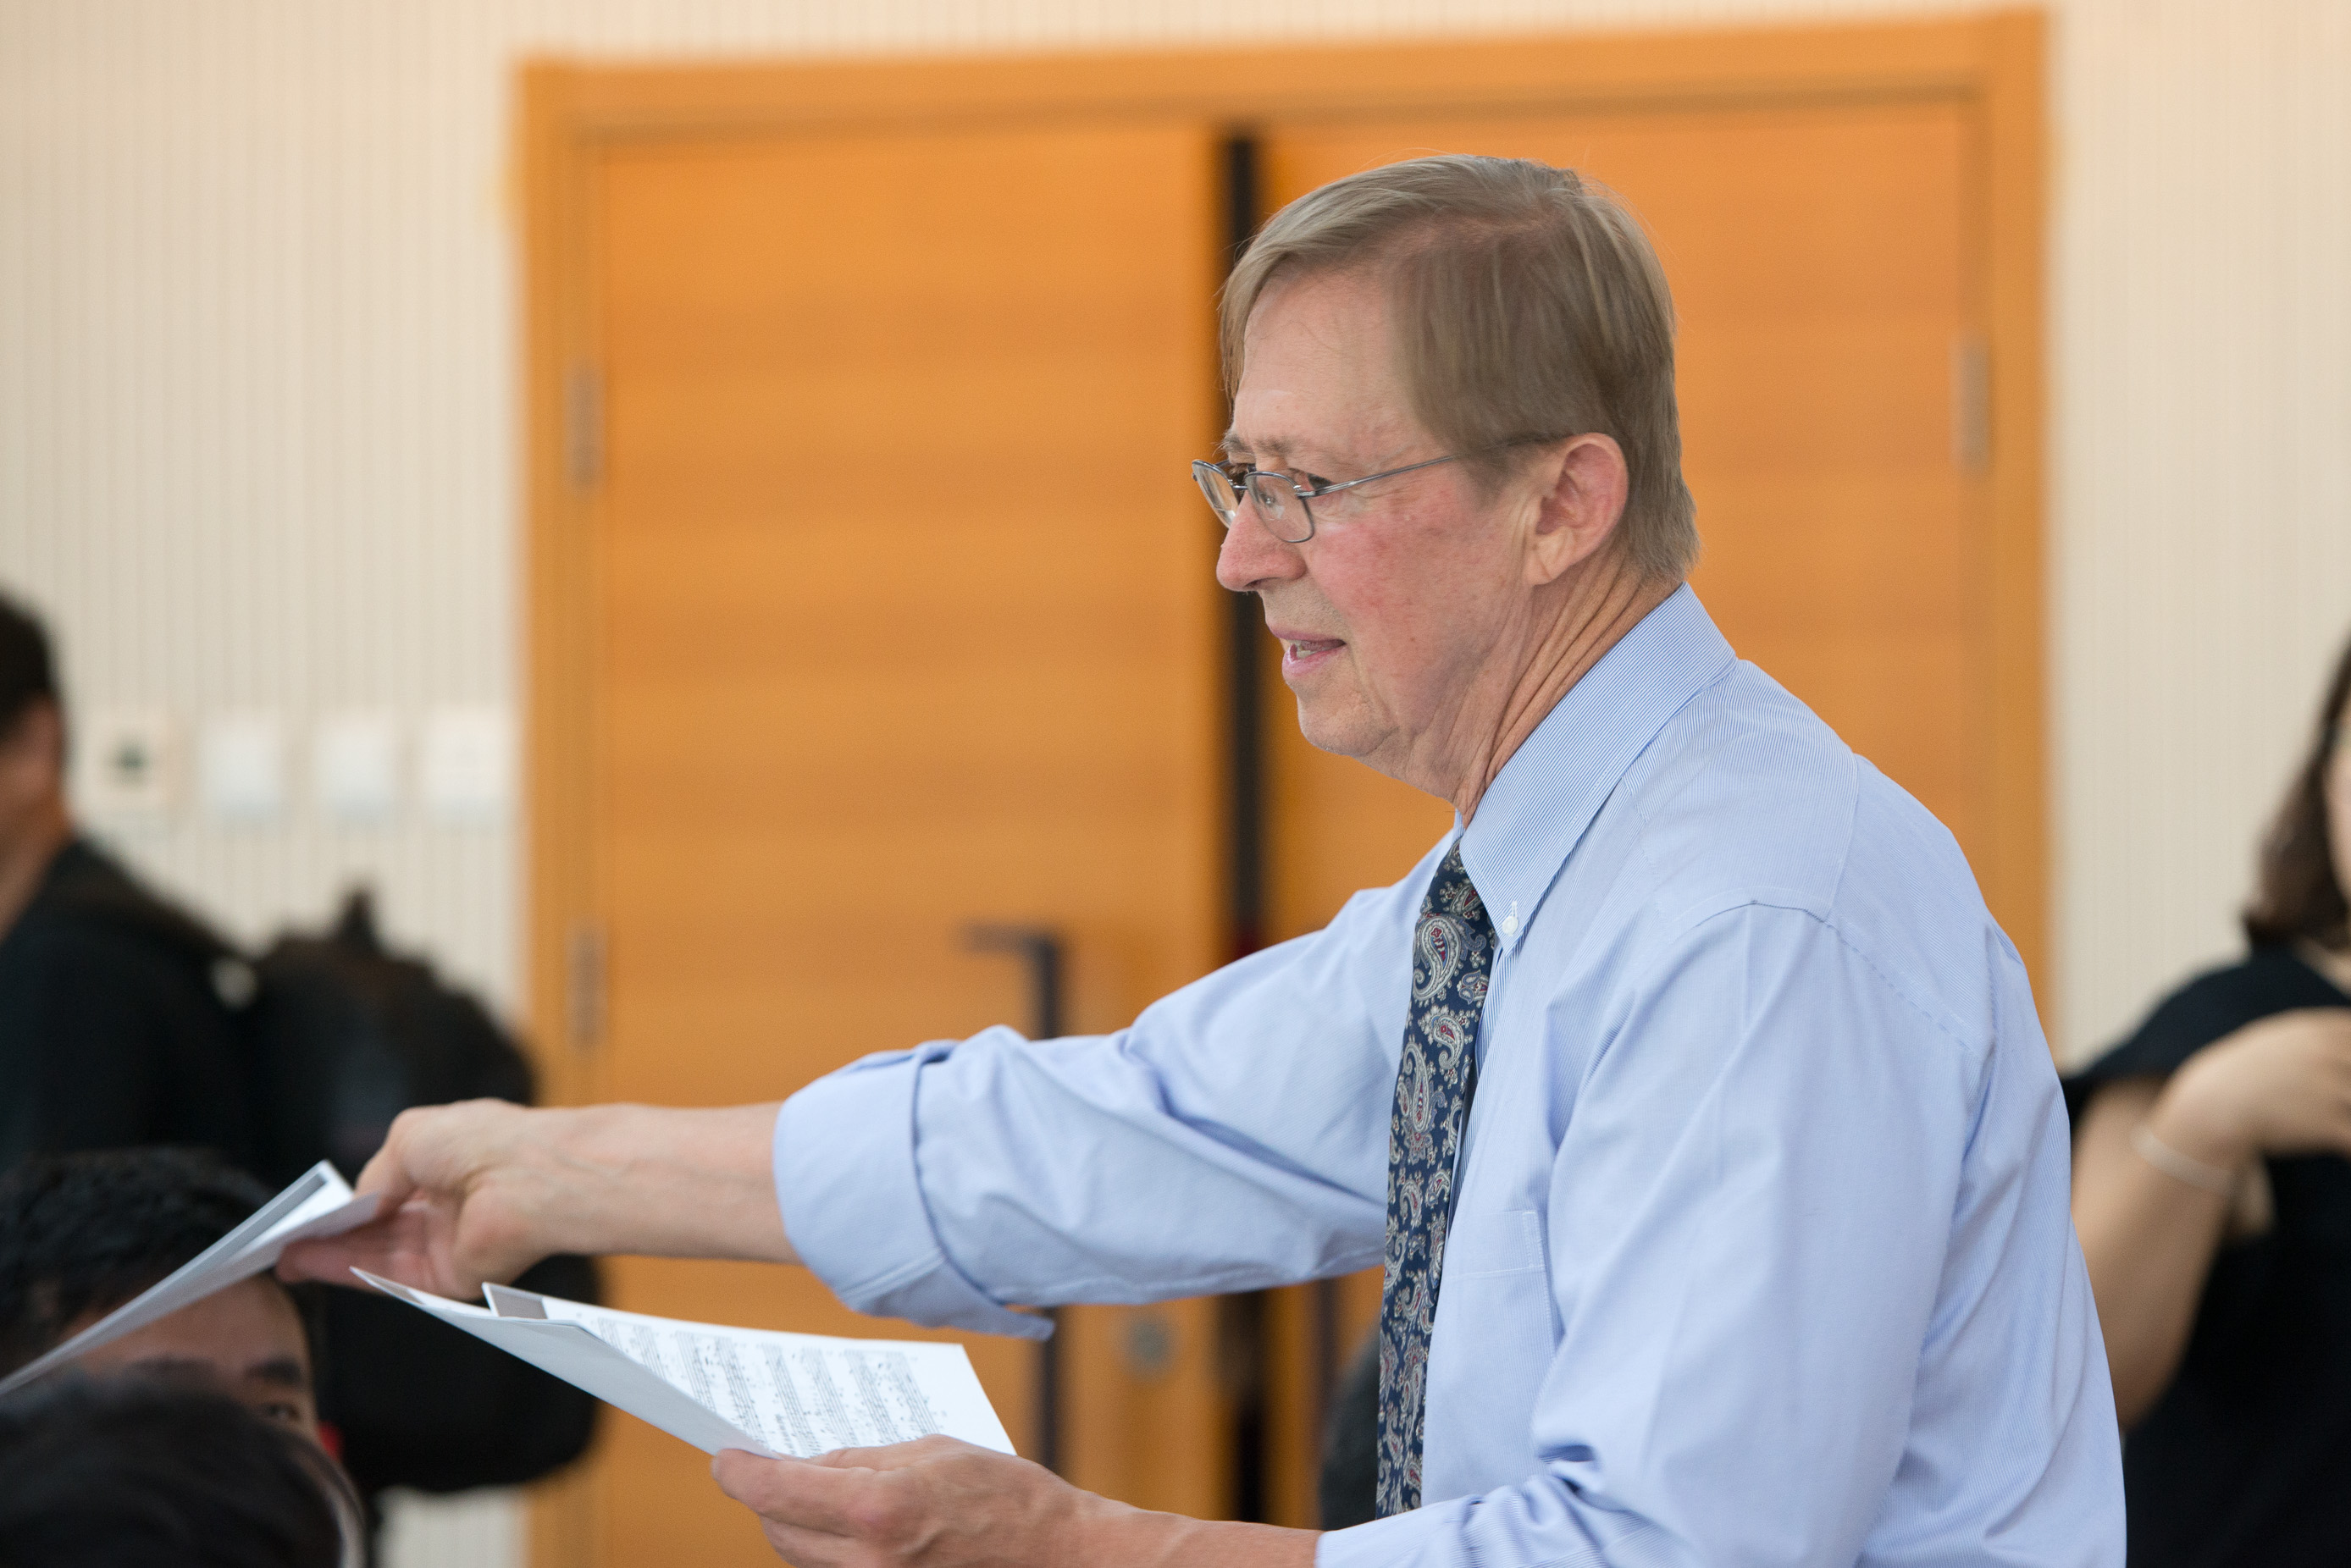 David hands out copies of the one of the chorale tunes that forms the basis of Symphony no. 8 and Songs for the Coming Day.